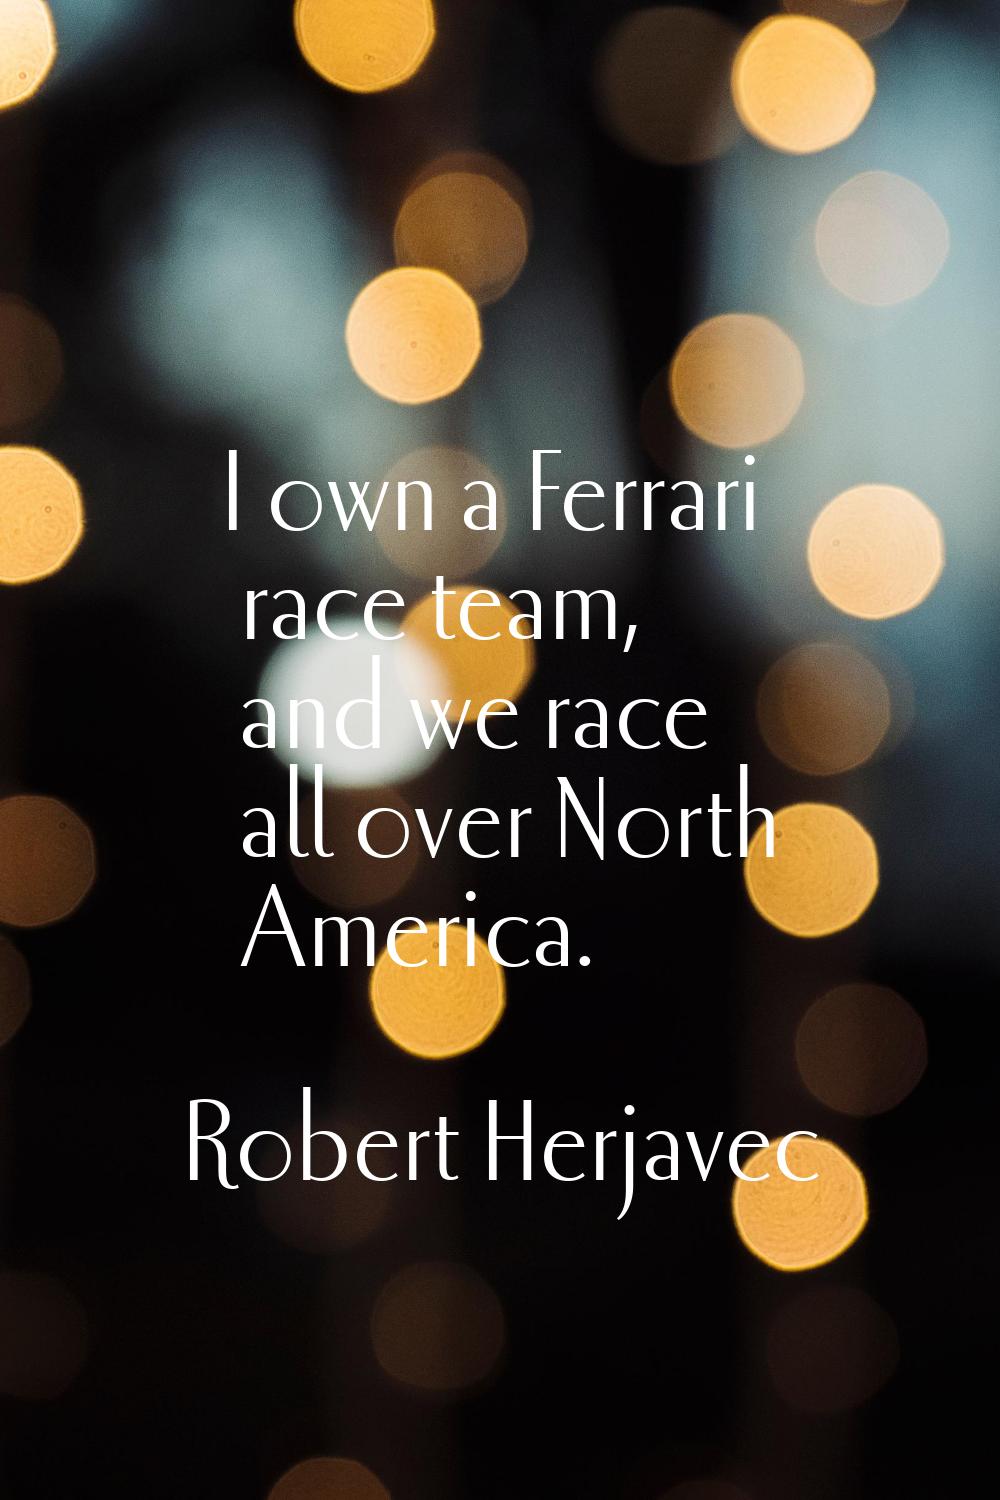 I own a Ferrari race team, and we race all over North America.